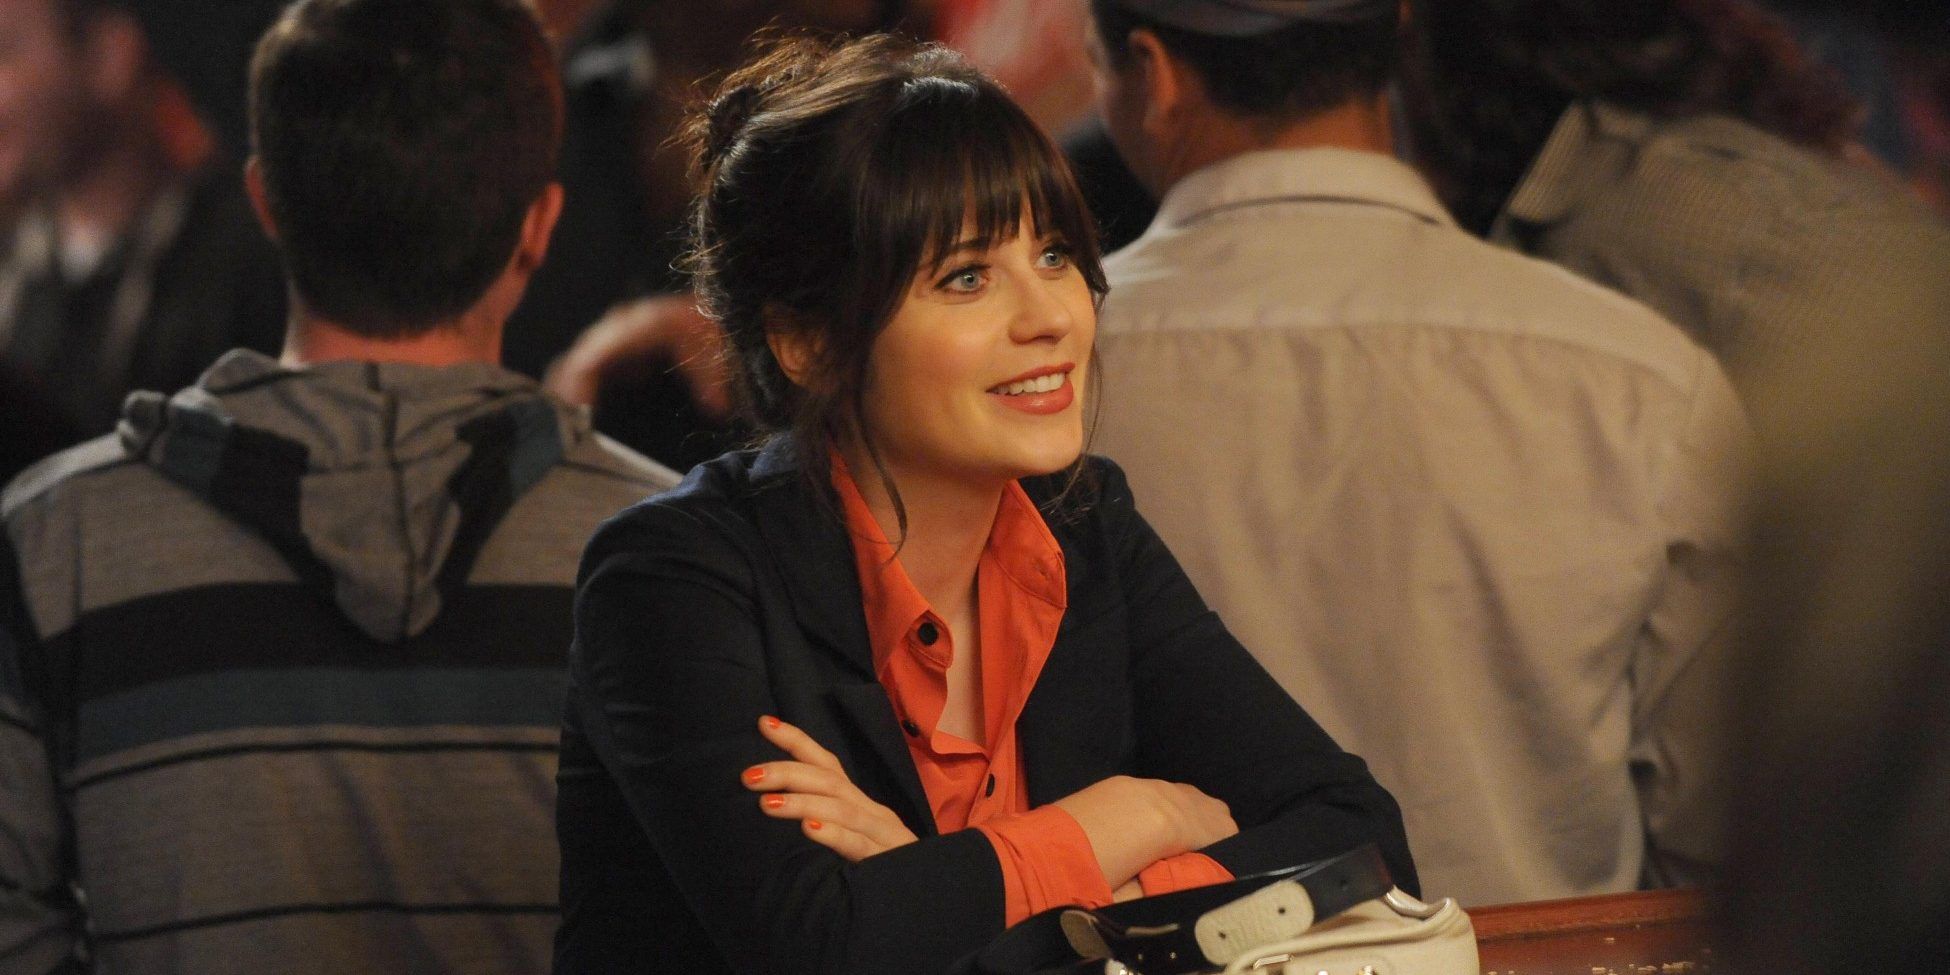 New Girl The 15 Best Episodes (According To IMDb)